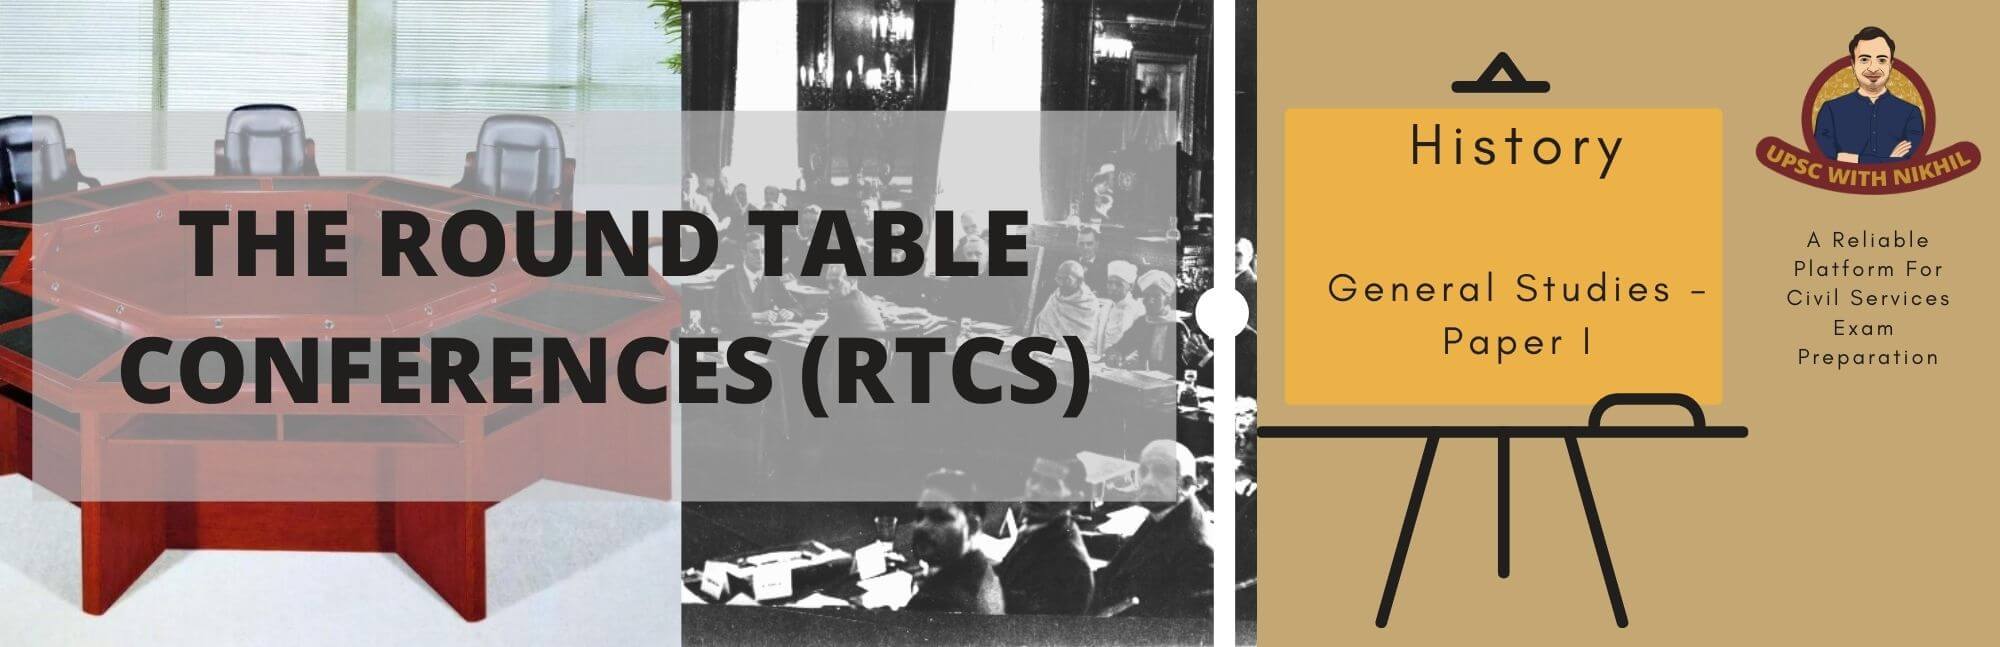 The Round Table Conferences Rtcs, Why Round Table Conference Was Held